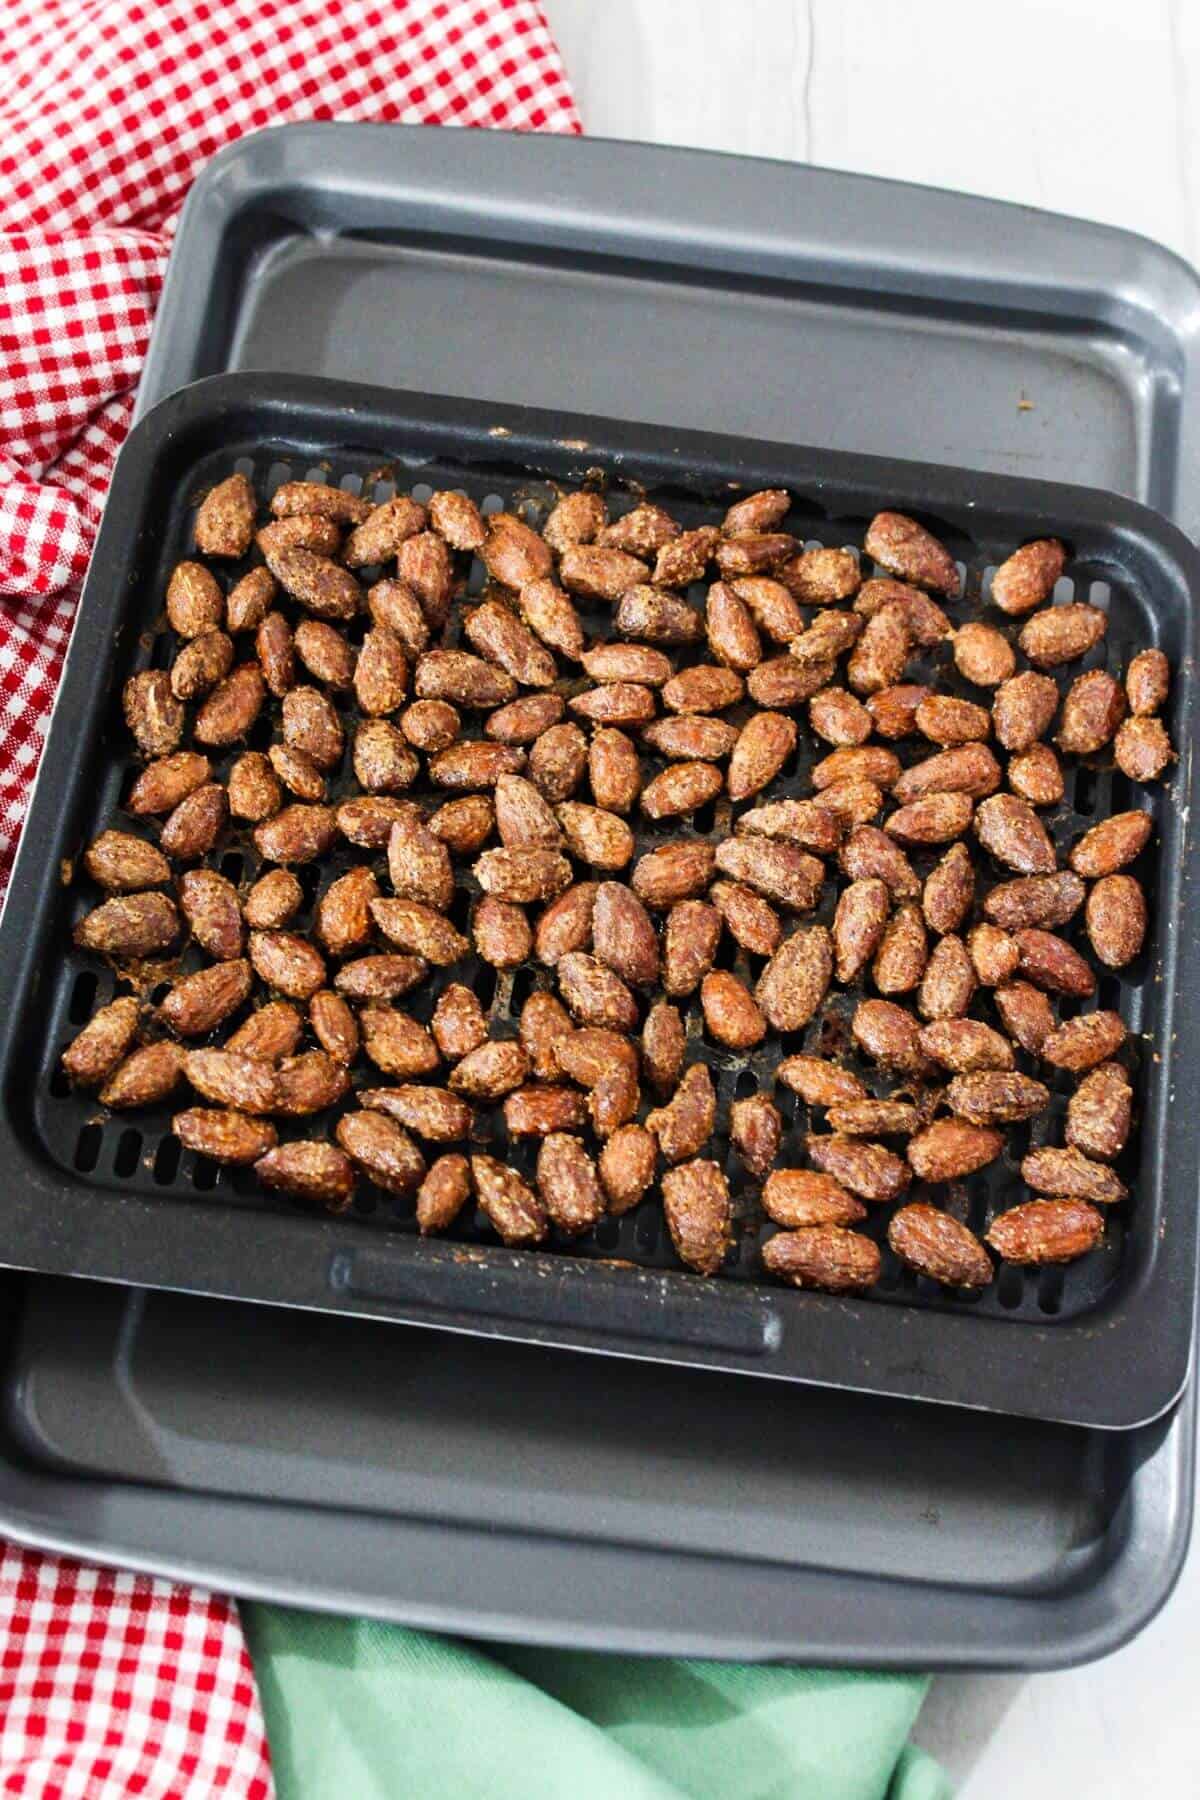 Candied almonds in an air fryer pan on a checkered napkin.